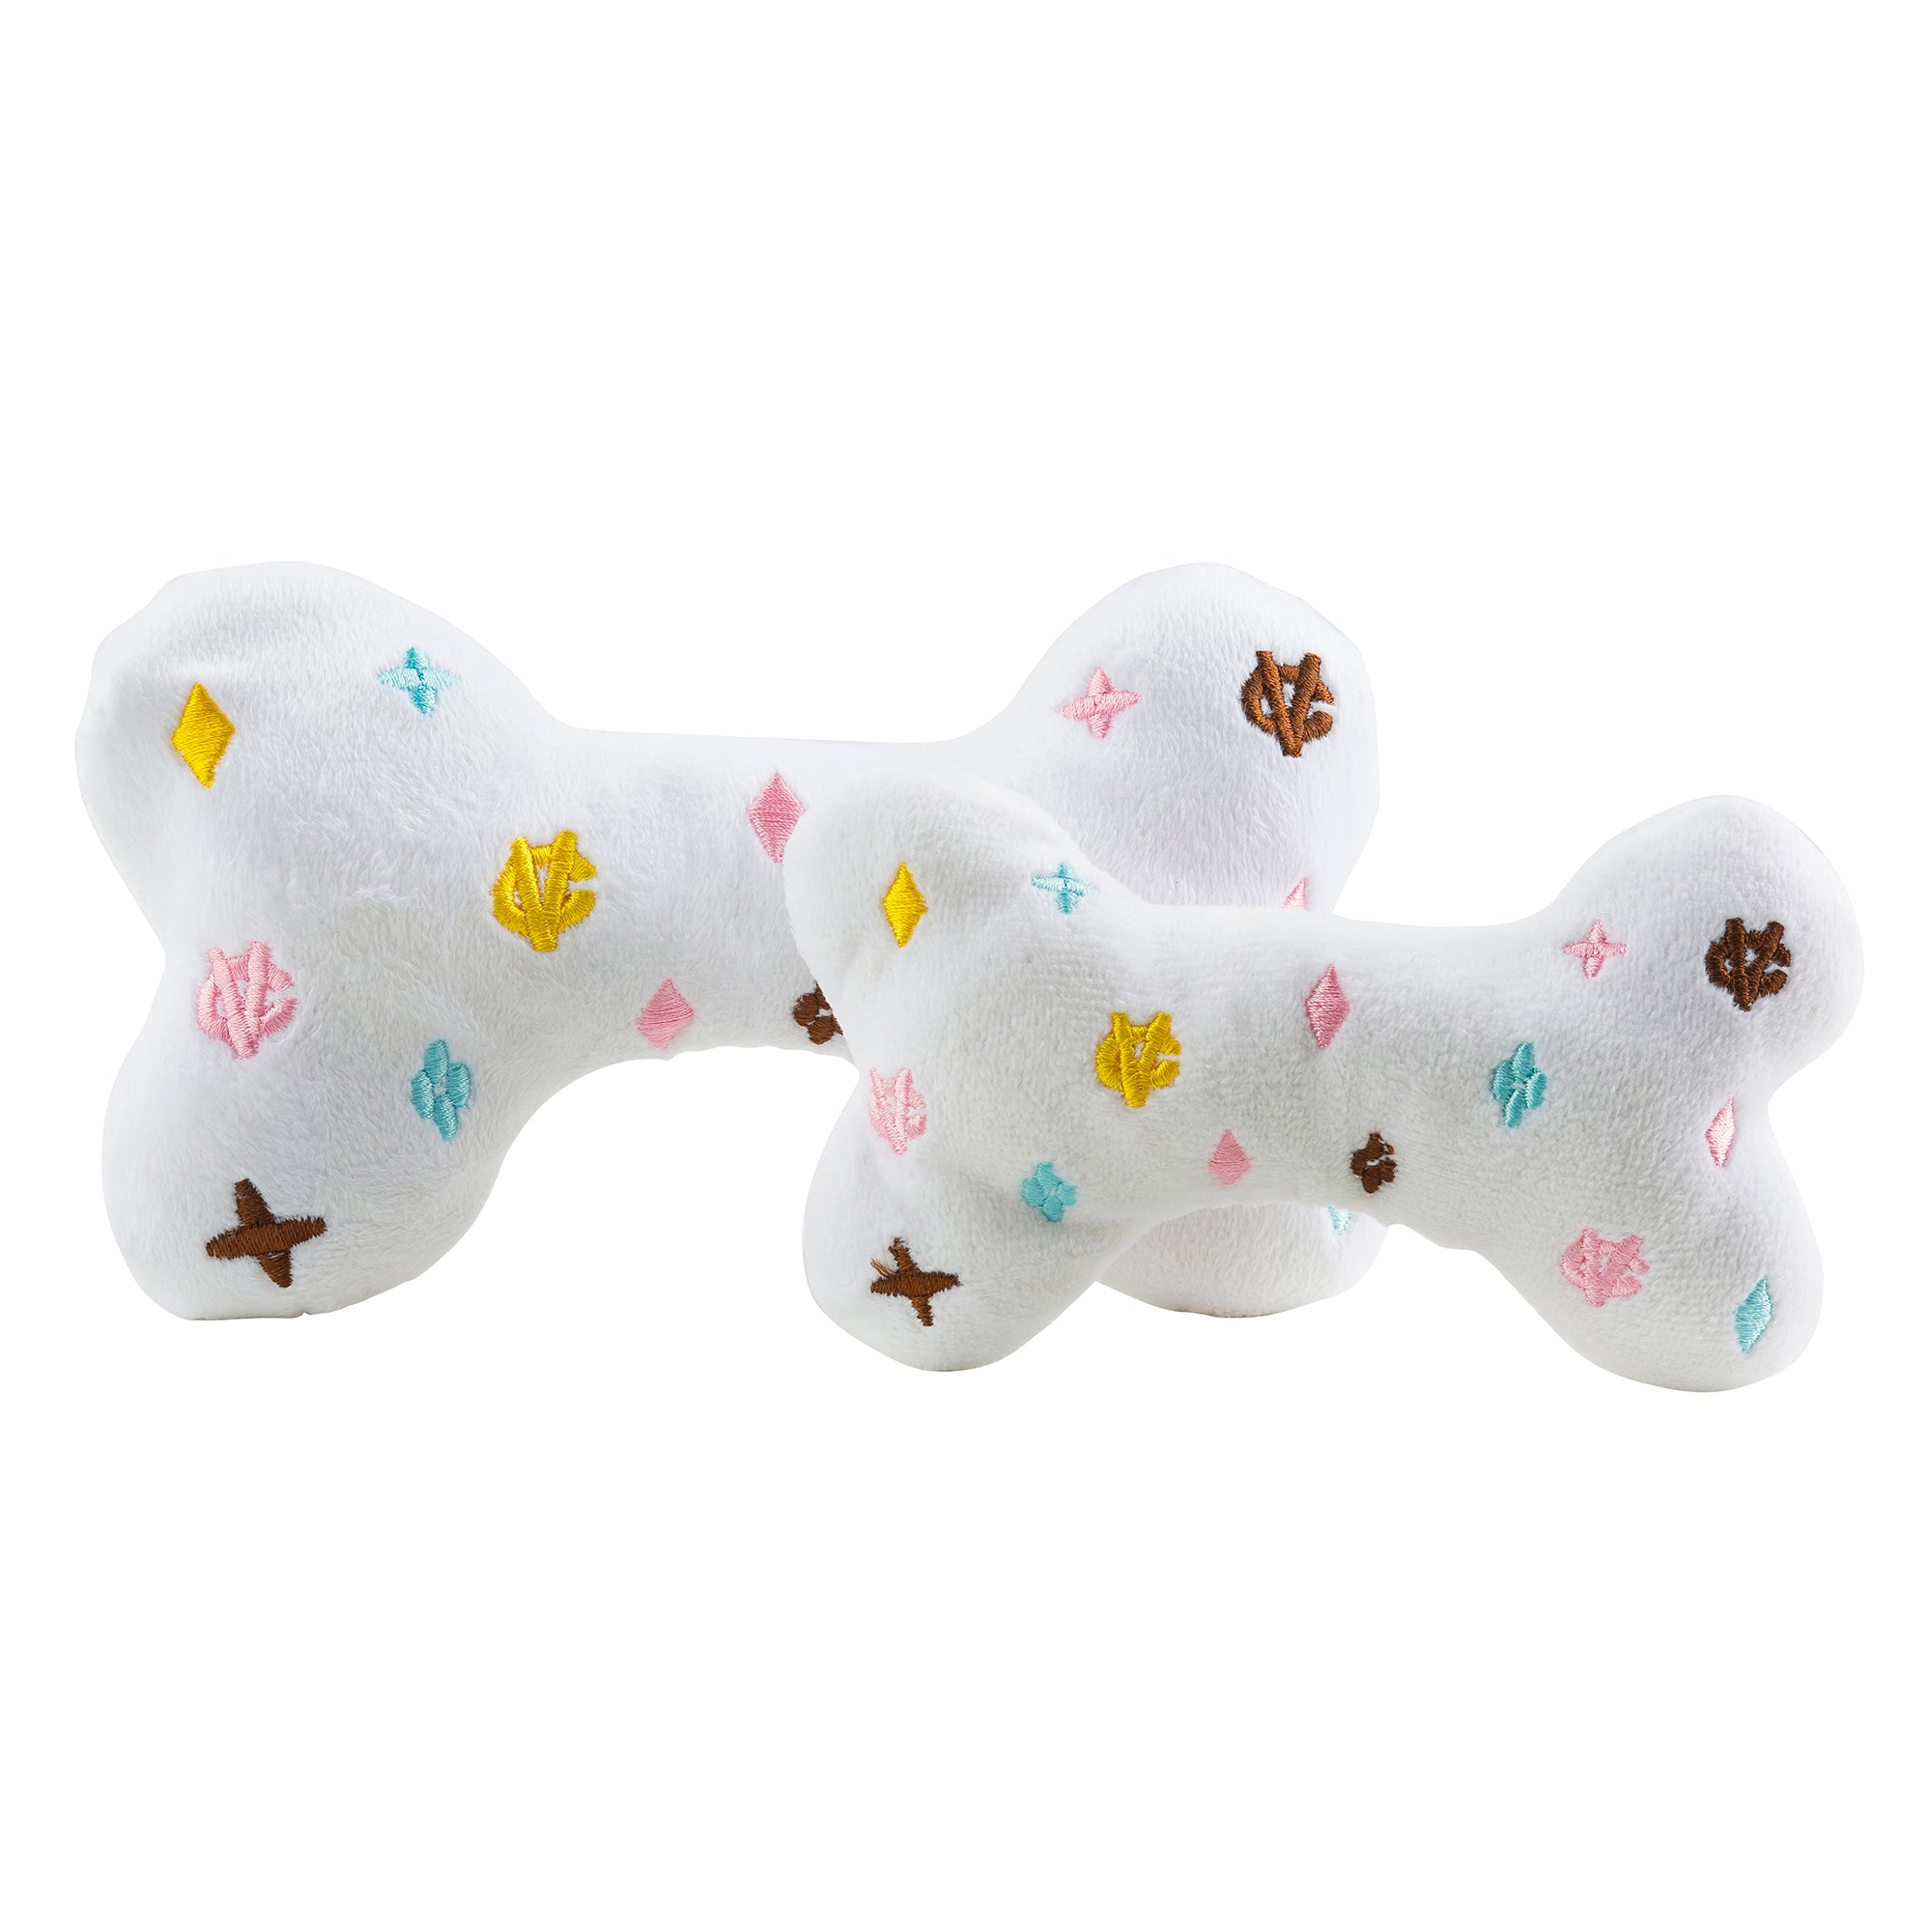  Haute Diggity Dog Chewy Vuiton White Collection – Soft Plush  Designer Dog Toys with Squeaker and Fun, Unique, Parody Designs from Safe,  Machine-Washable Materials for All Breeds & Sizes 